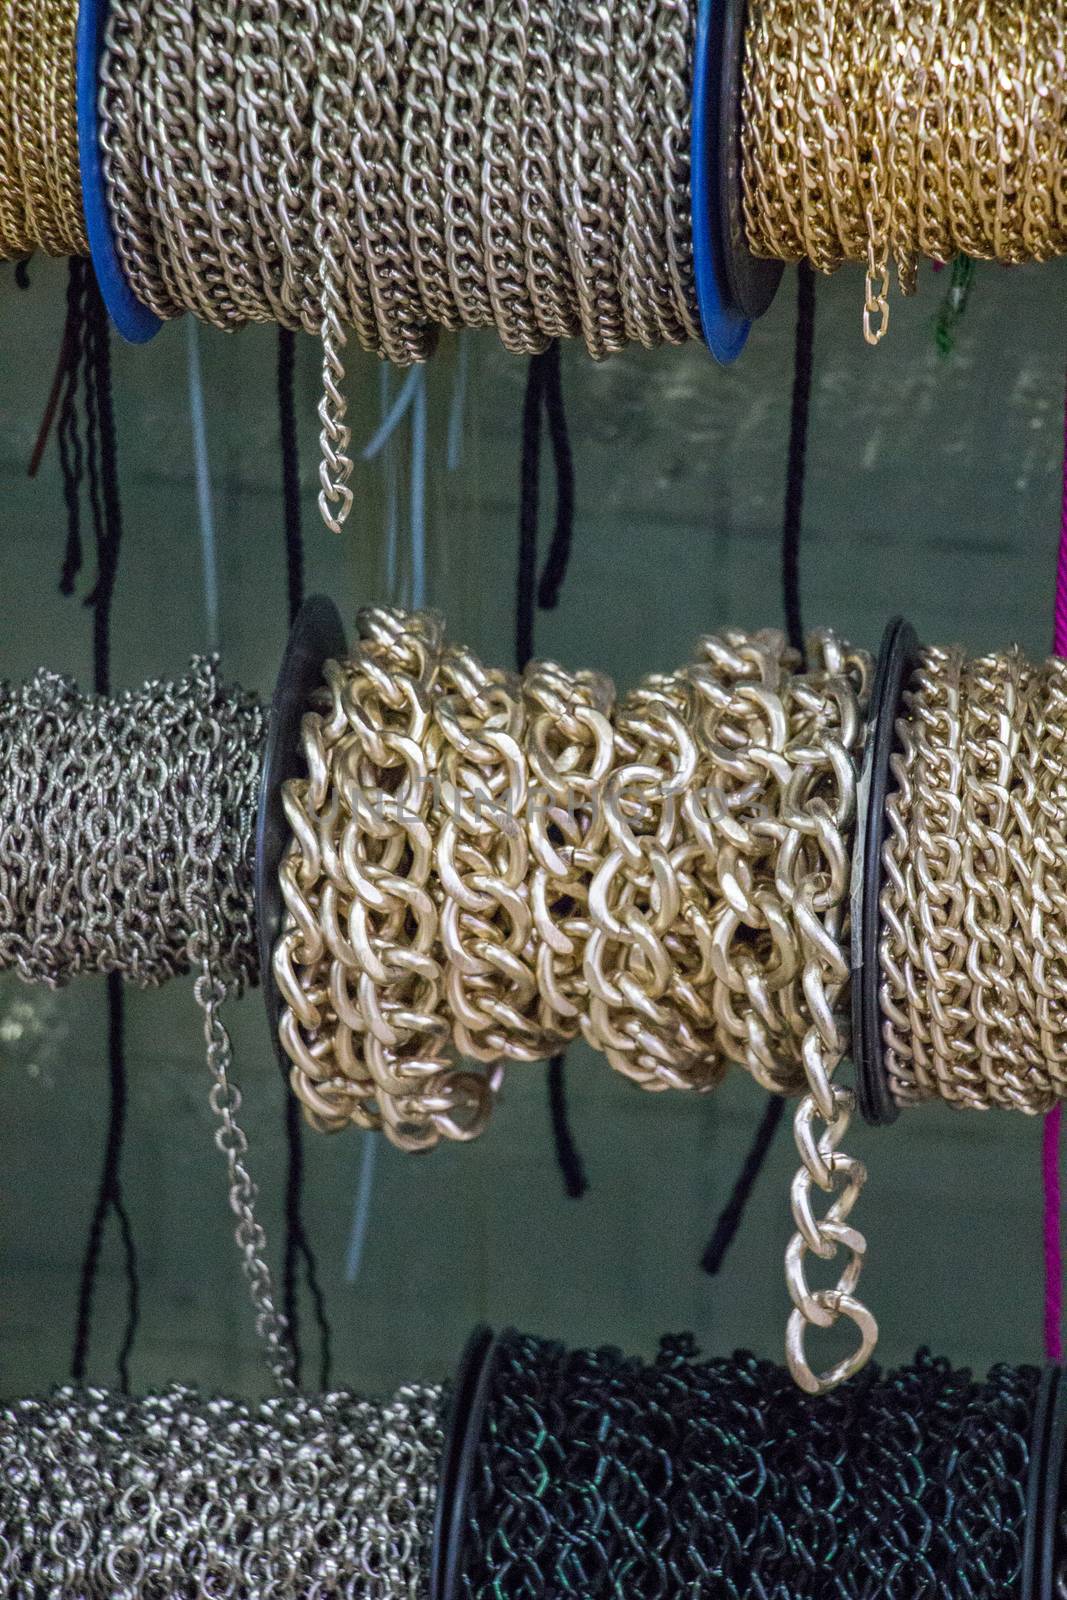 Rolls of decorative chains in view